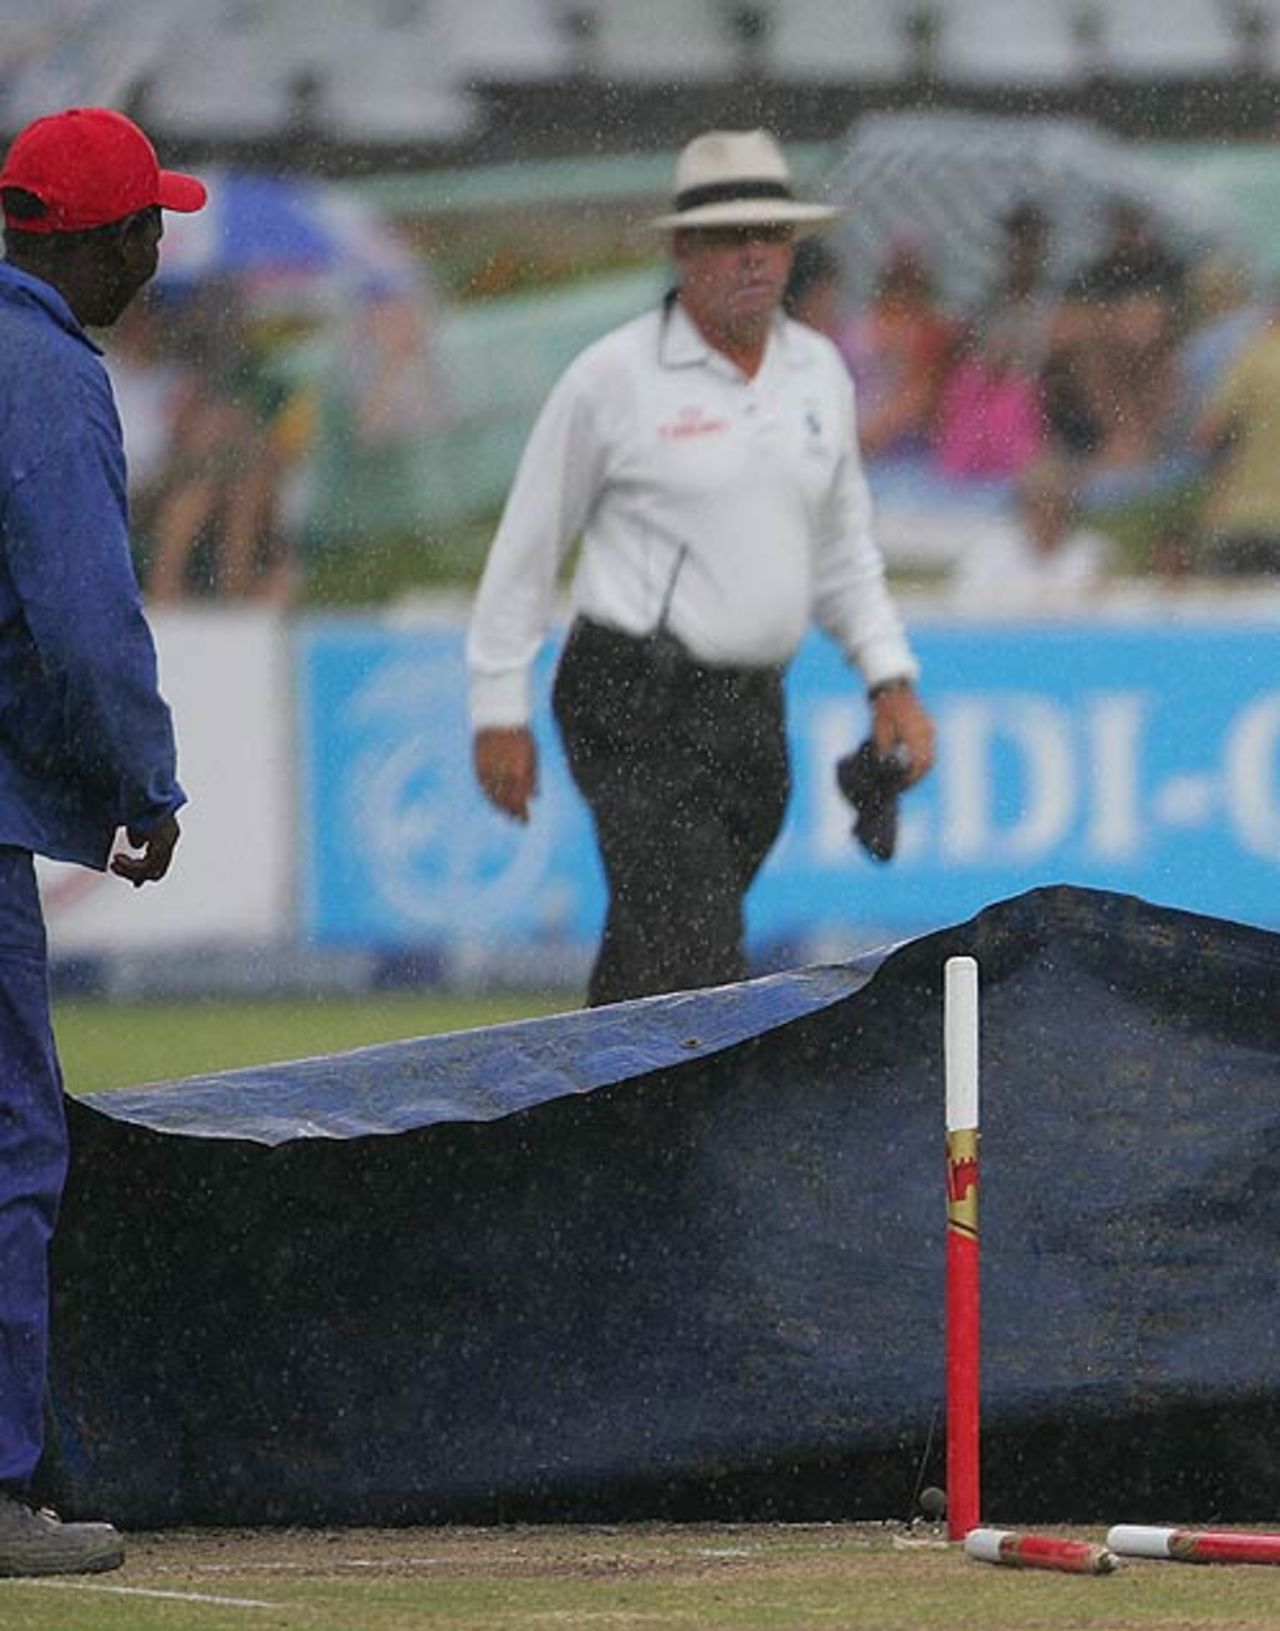 The groundstaff bring on the covers at Newlands, South Africa v India, 3rd Test, Cape Town, 5th day, January 6, 2007